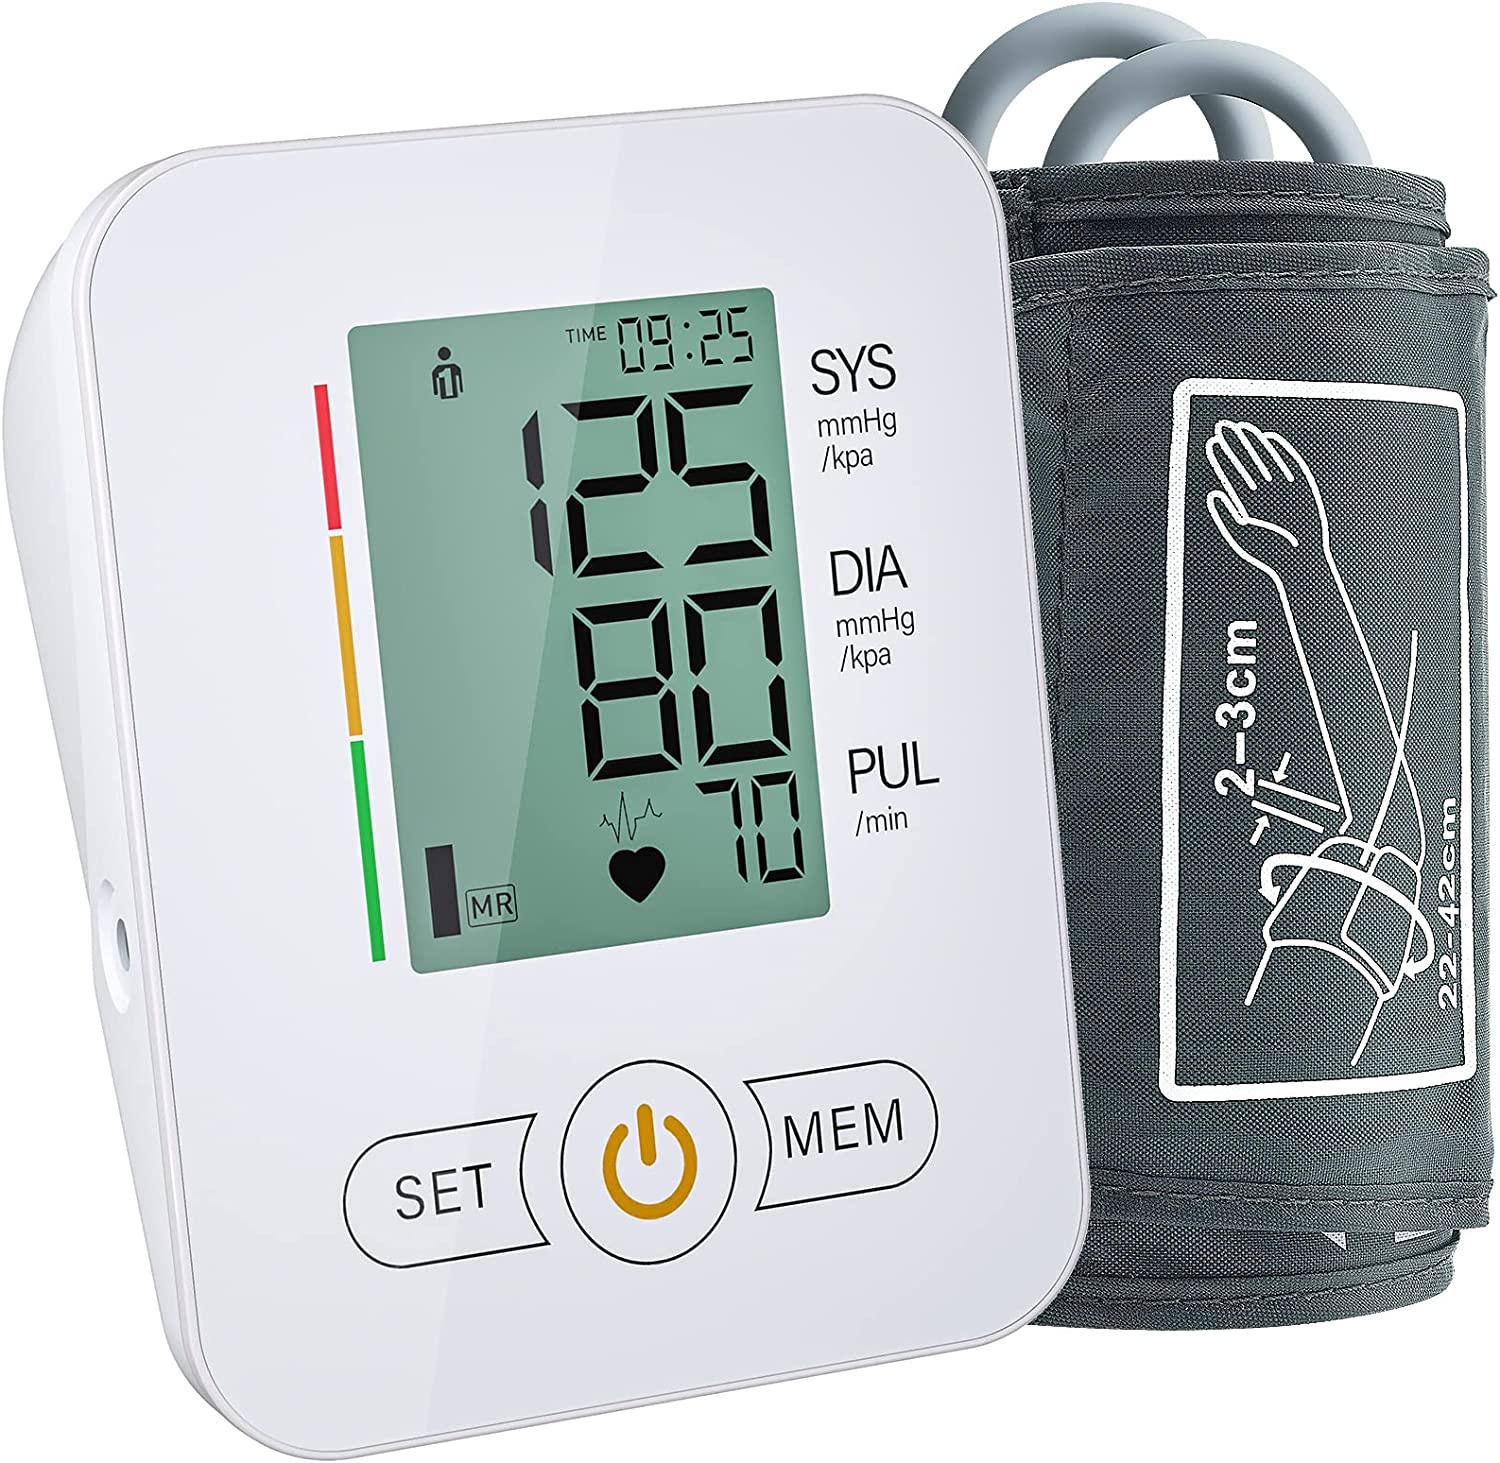  Automatic Arm Blood Pressure Monitors-maguja Automatic Digital  Upper Arm Blood Pressure Monitor Arm Machine, Wide Range of Bandwidth,  Large Cuff, Large LCD Display BP Monitor, Suitable for Home Use : Health